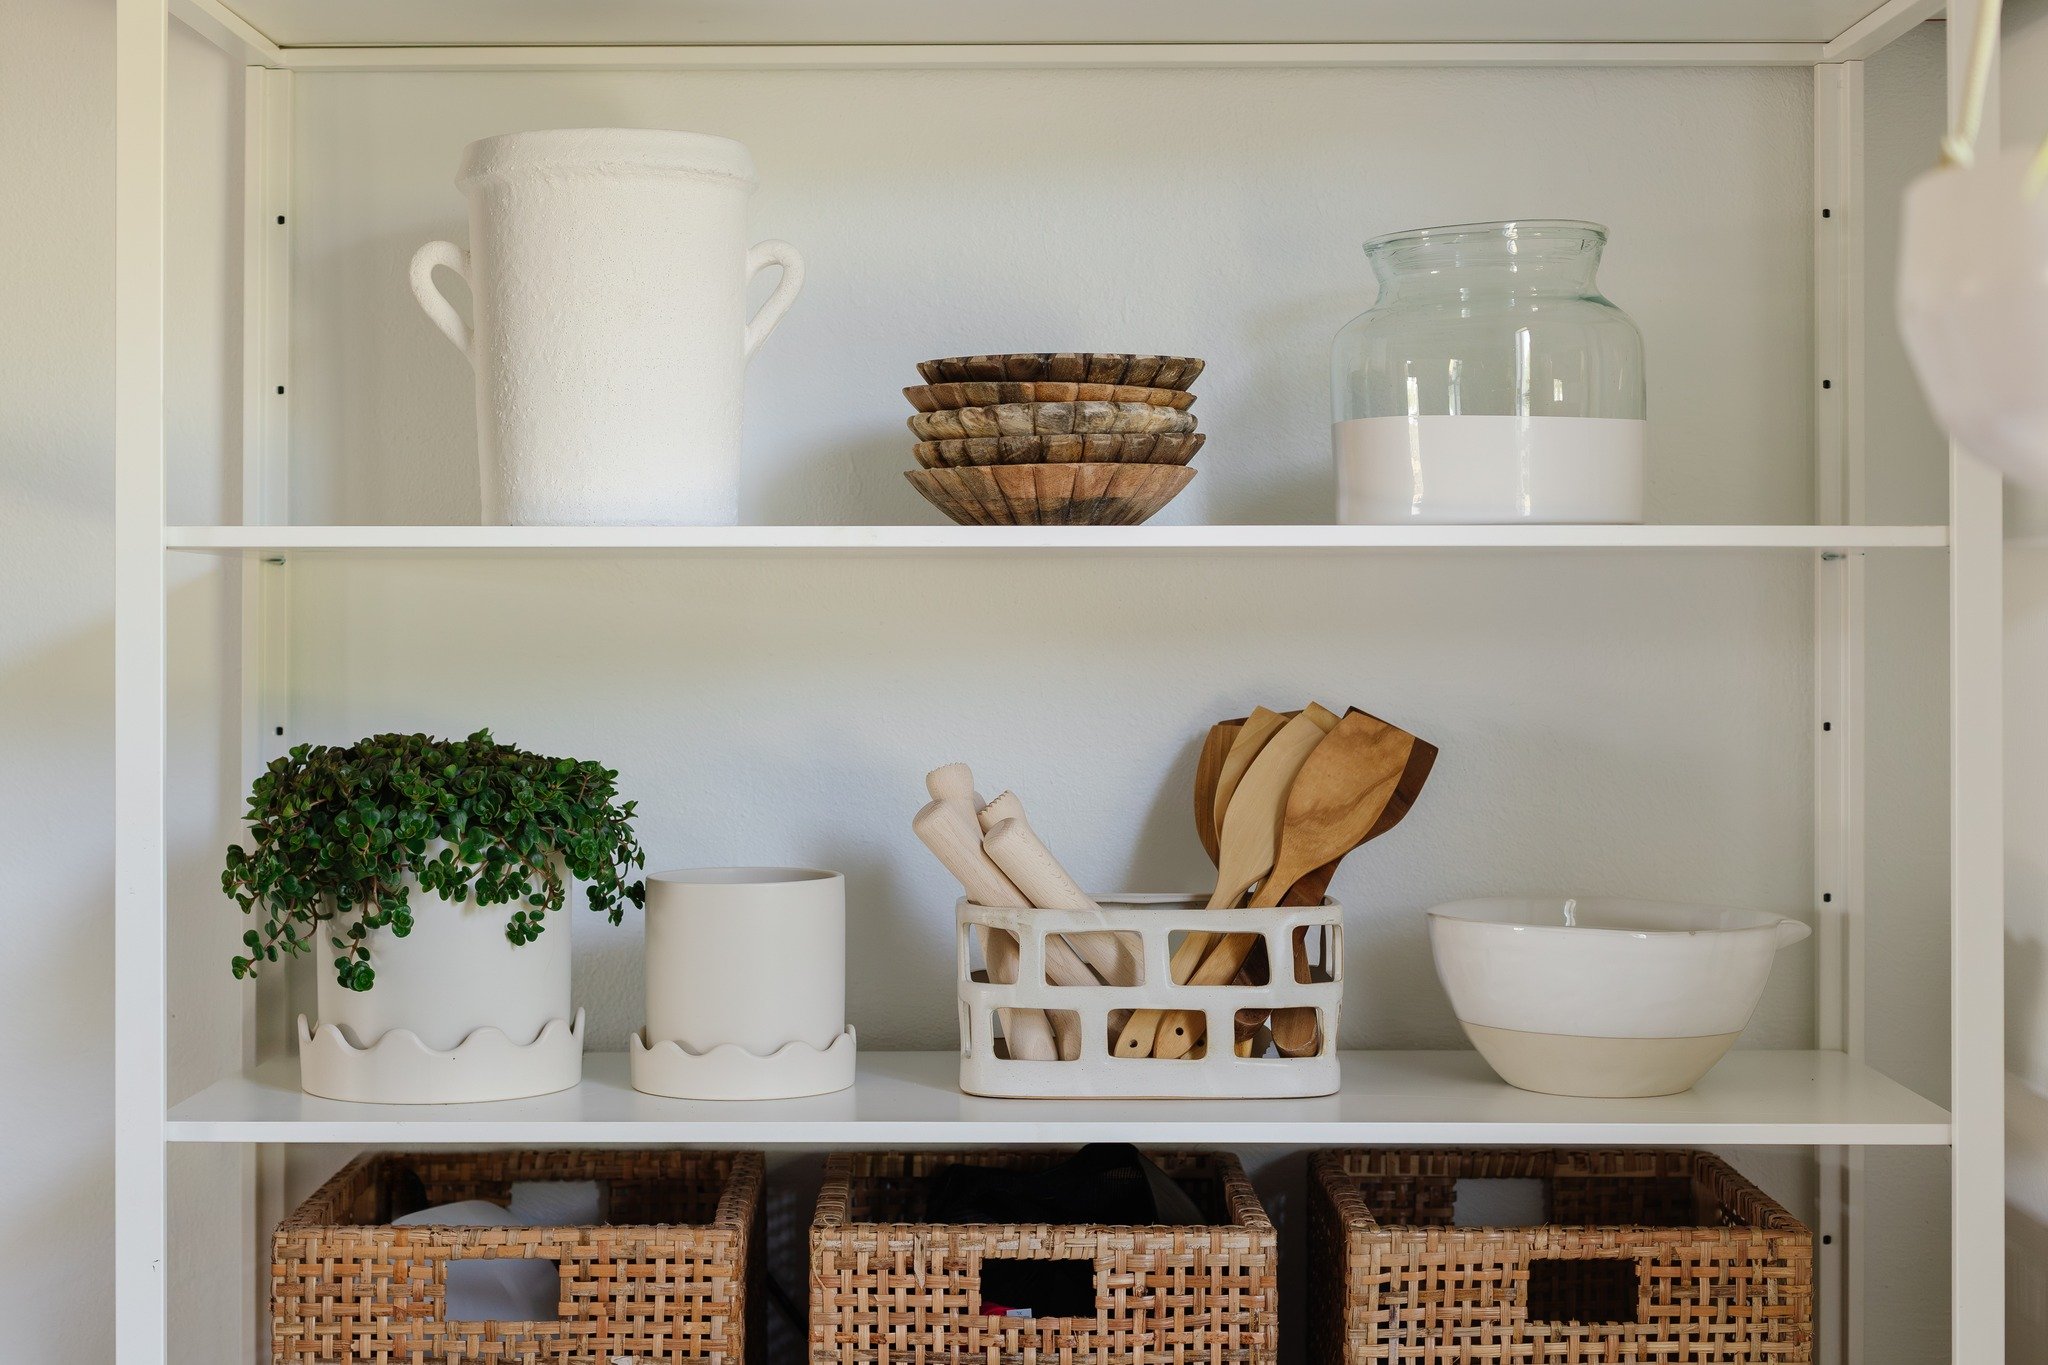 So much to love on these shelves 😊🤍 Check out our inventory at shopgraberco.com
.
.
.
.
.
.
shop. shop small. shop local. home decor. home goods. shelf styling. interior decor